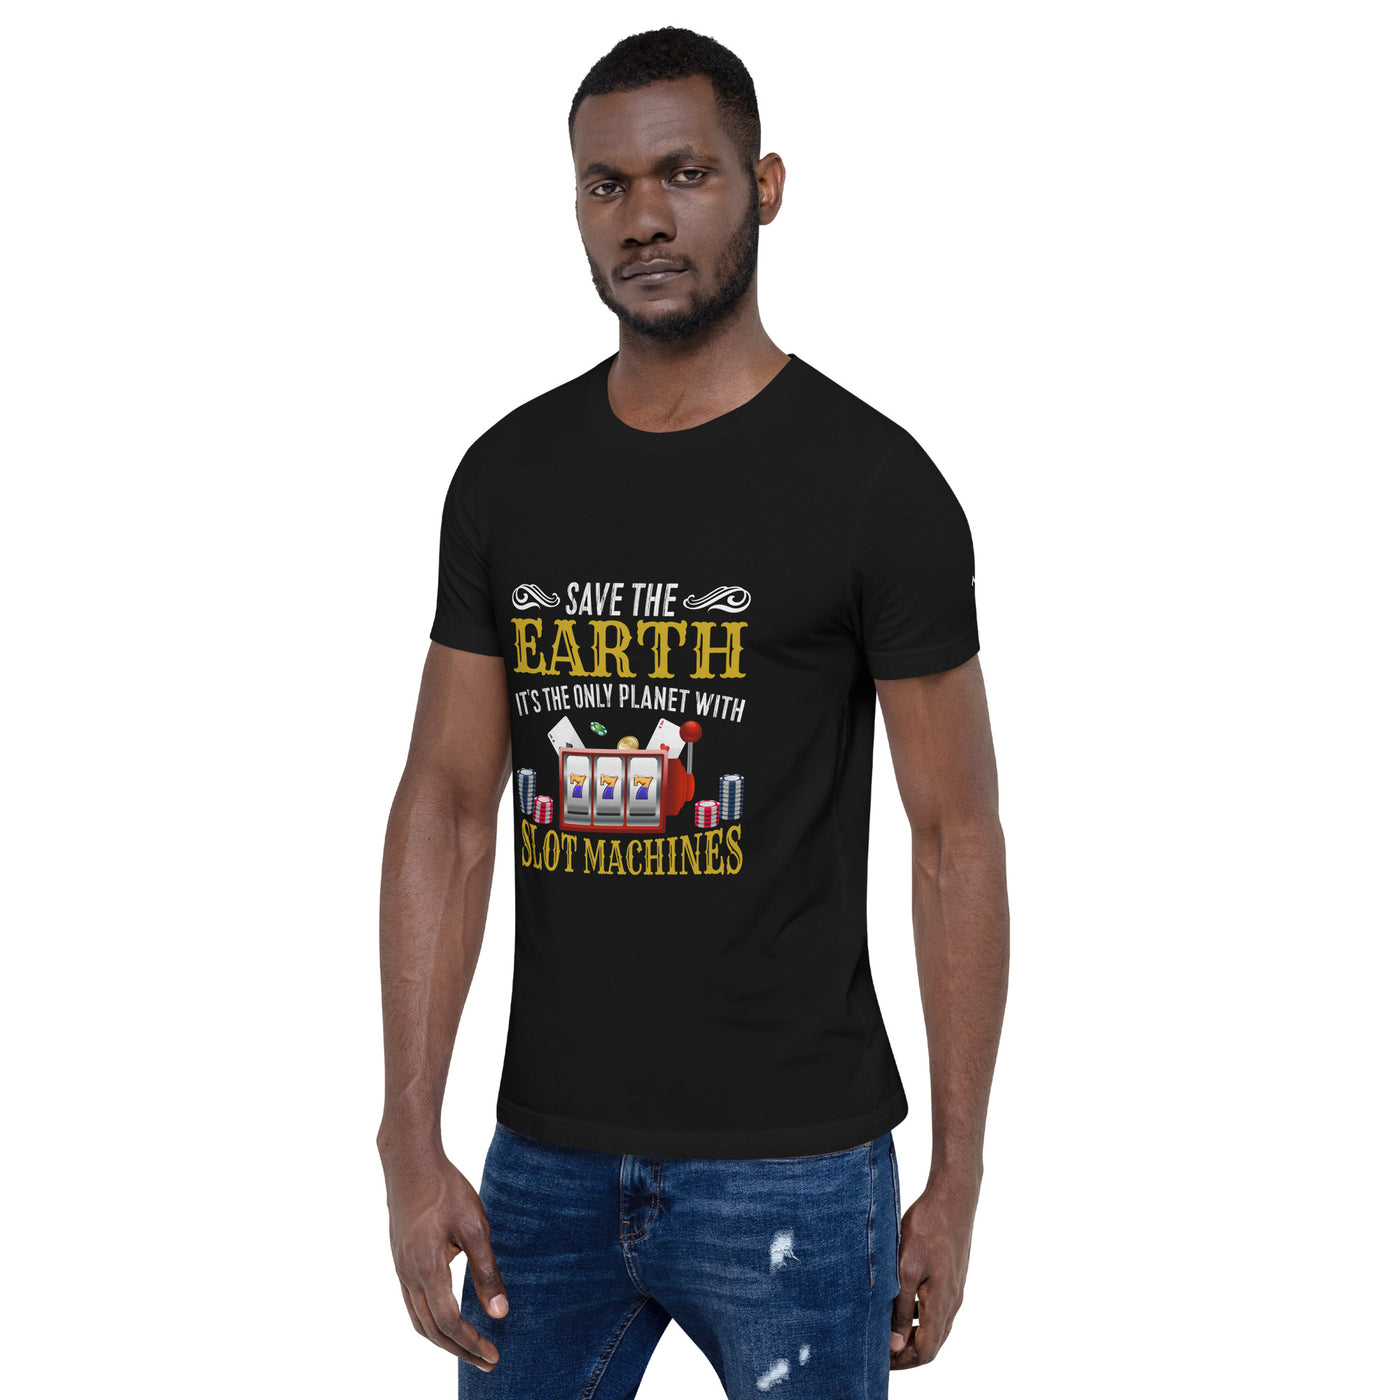 Save the Earth; it's the only Planet with Slot Machines - Unisex t-shirt